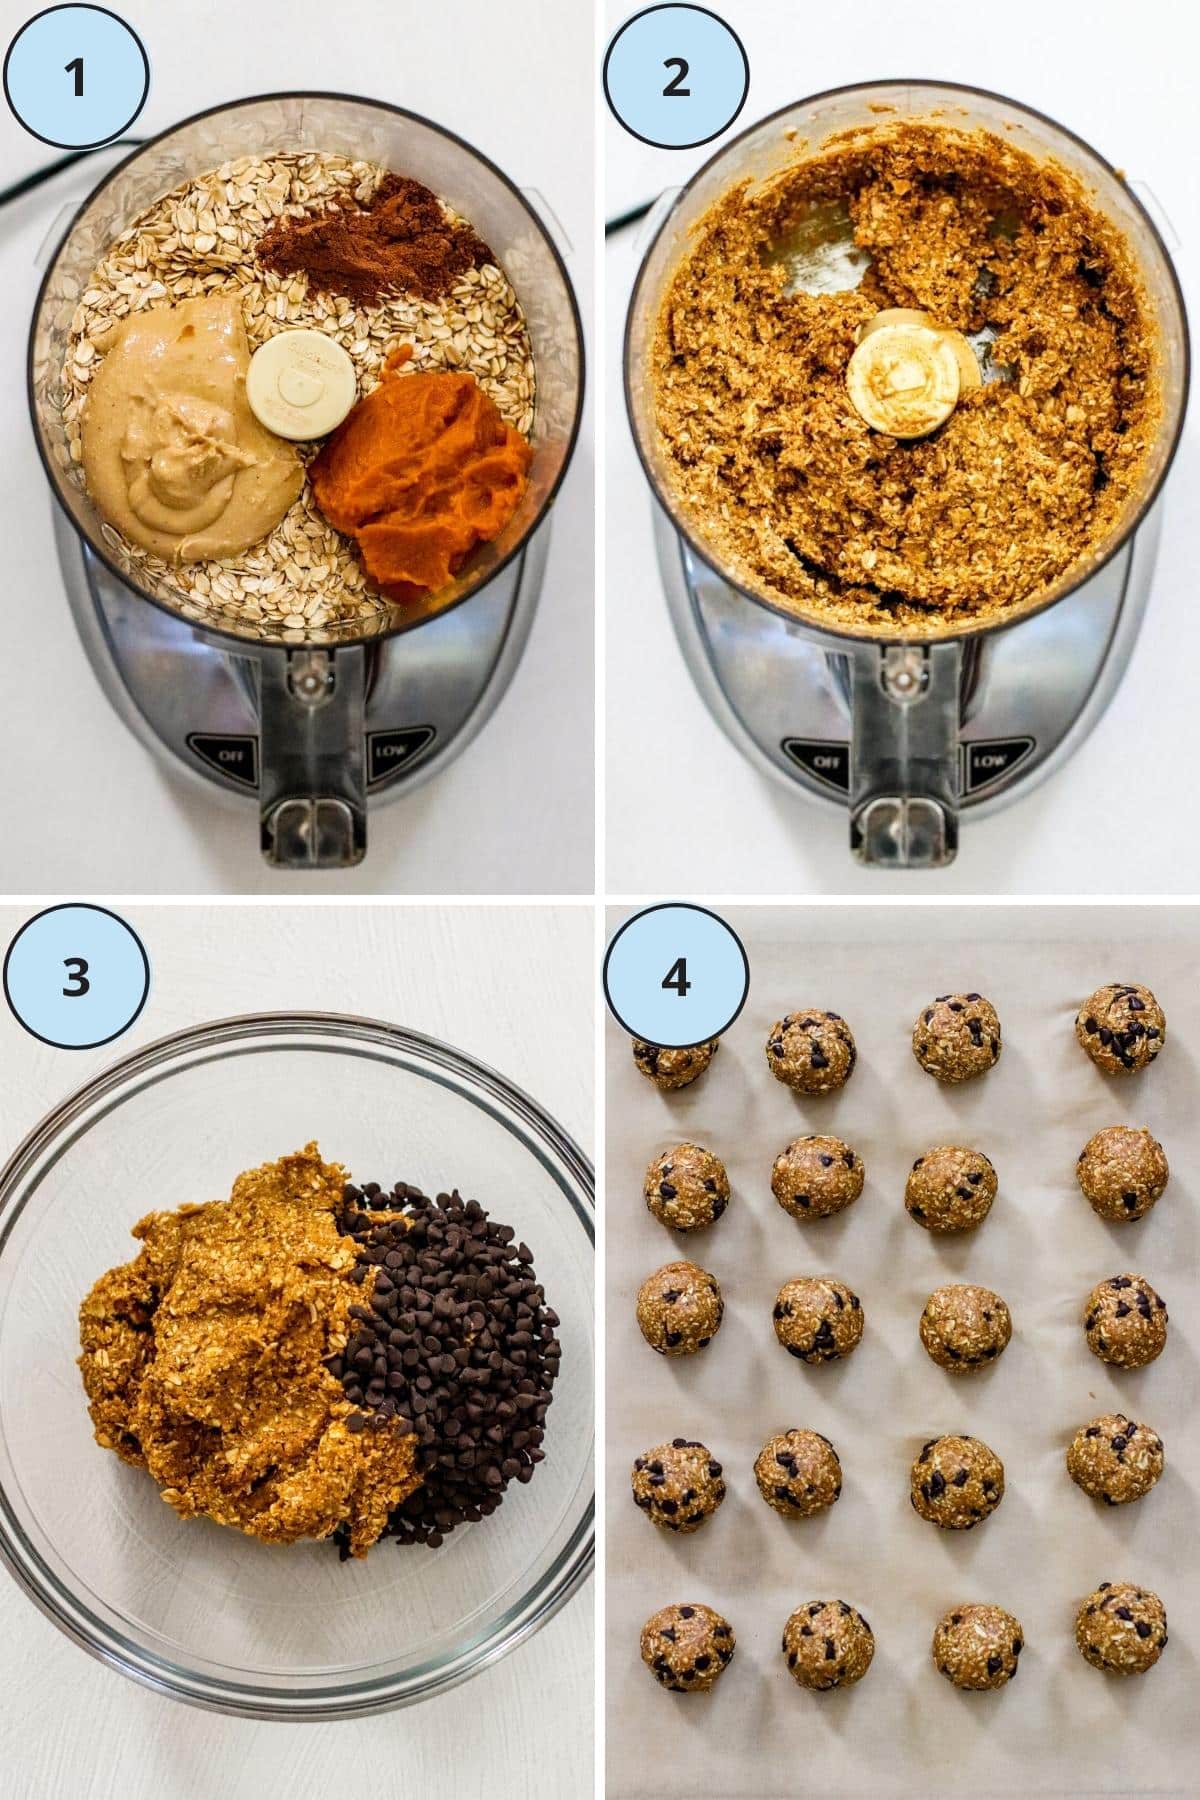 Steps 1 to 4 for making pumpkin balls: 1 The ingredients in a food processor, 2 the combined oat mixture, 3 The mixture in a bowl with the chocolate chips, and 4 The formed balls on a piece of parchment paper.